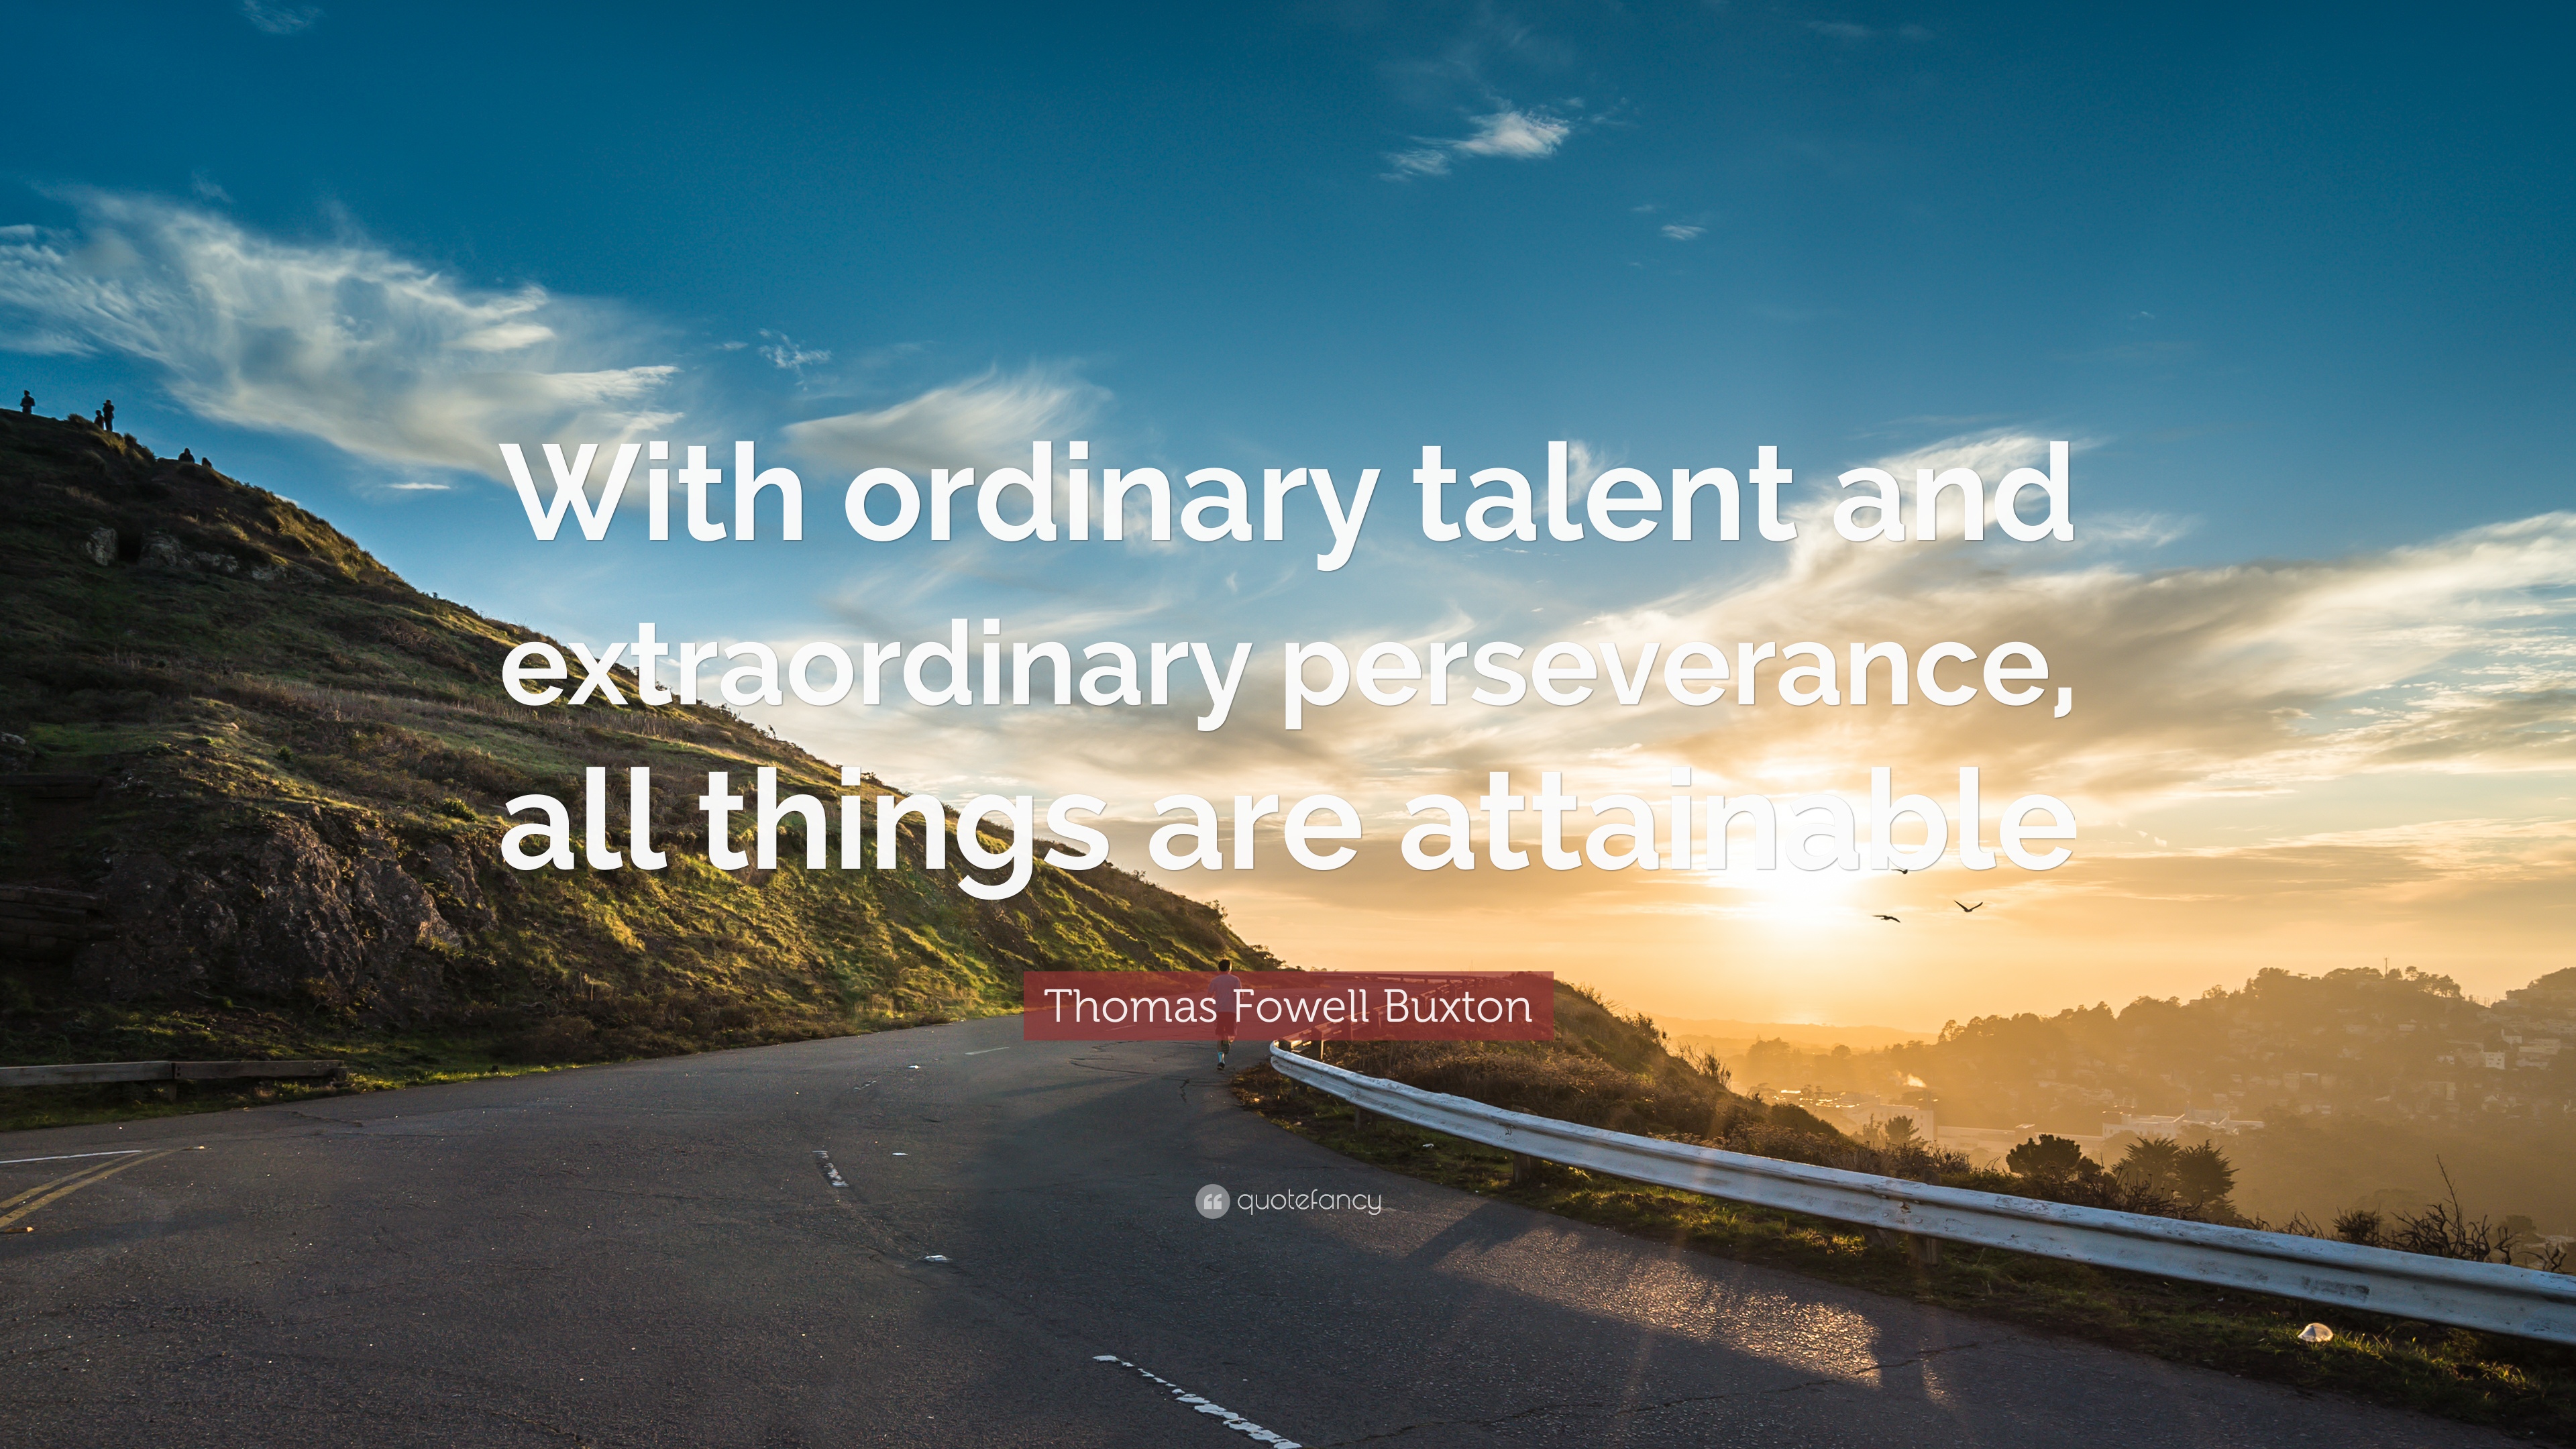 Thomas Fowell Buxton Quote: “With ordinary talent and ...